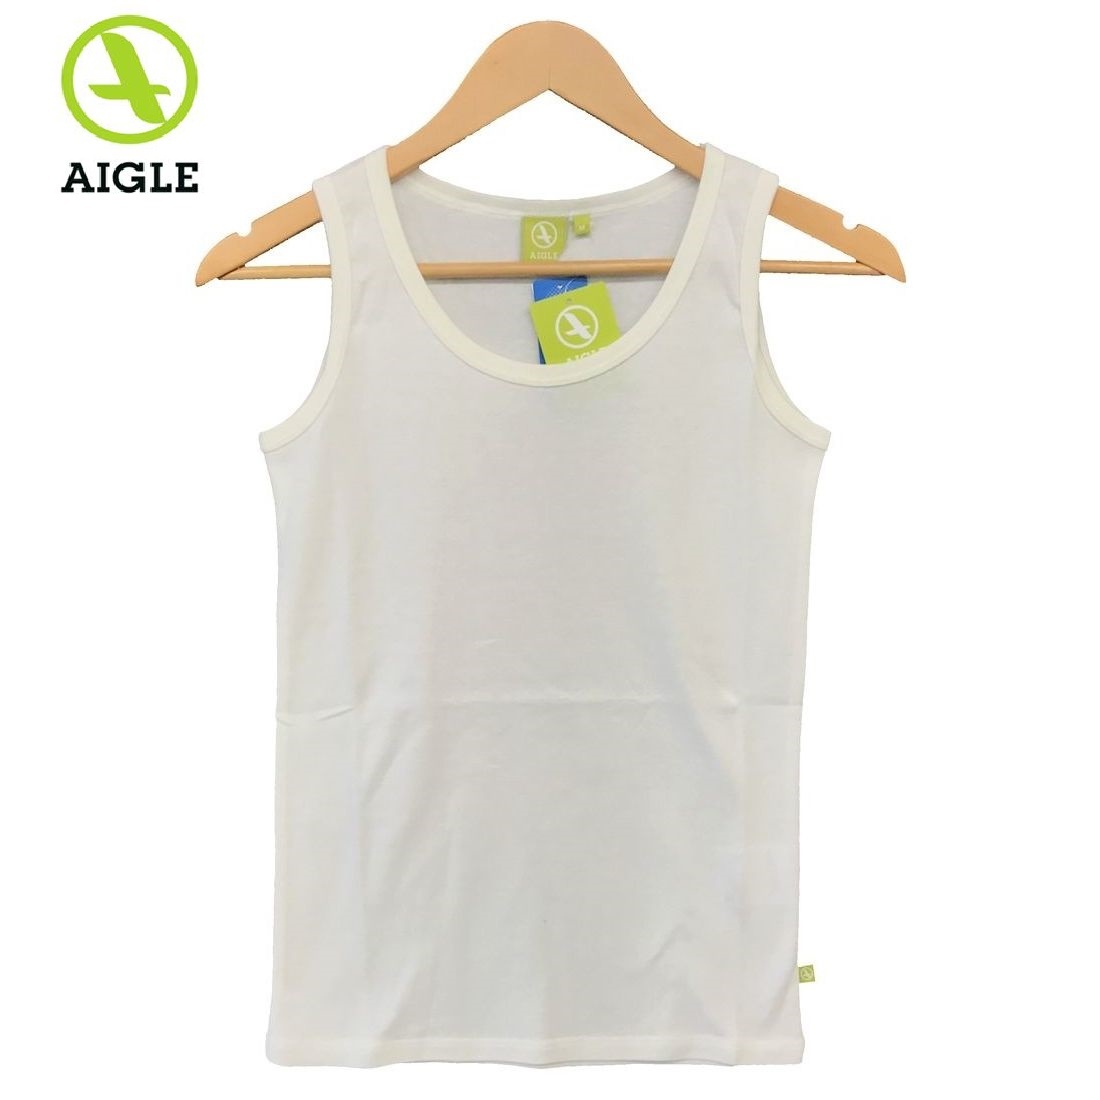  unused goods tag attaching AIGLE Aigle TWINSET plain no sleeve cut and sewn tanker tank top innerwear lady's outdoor M